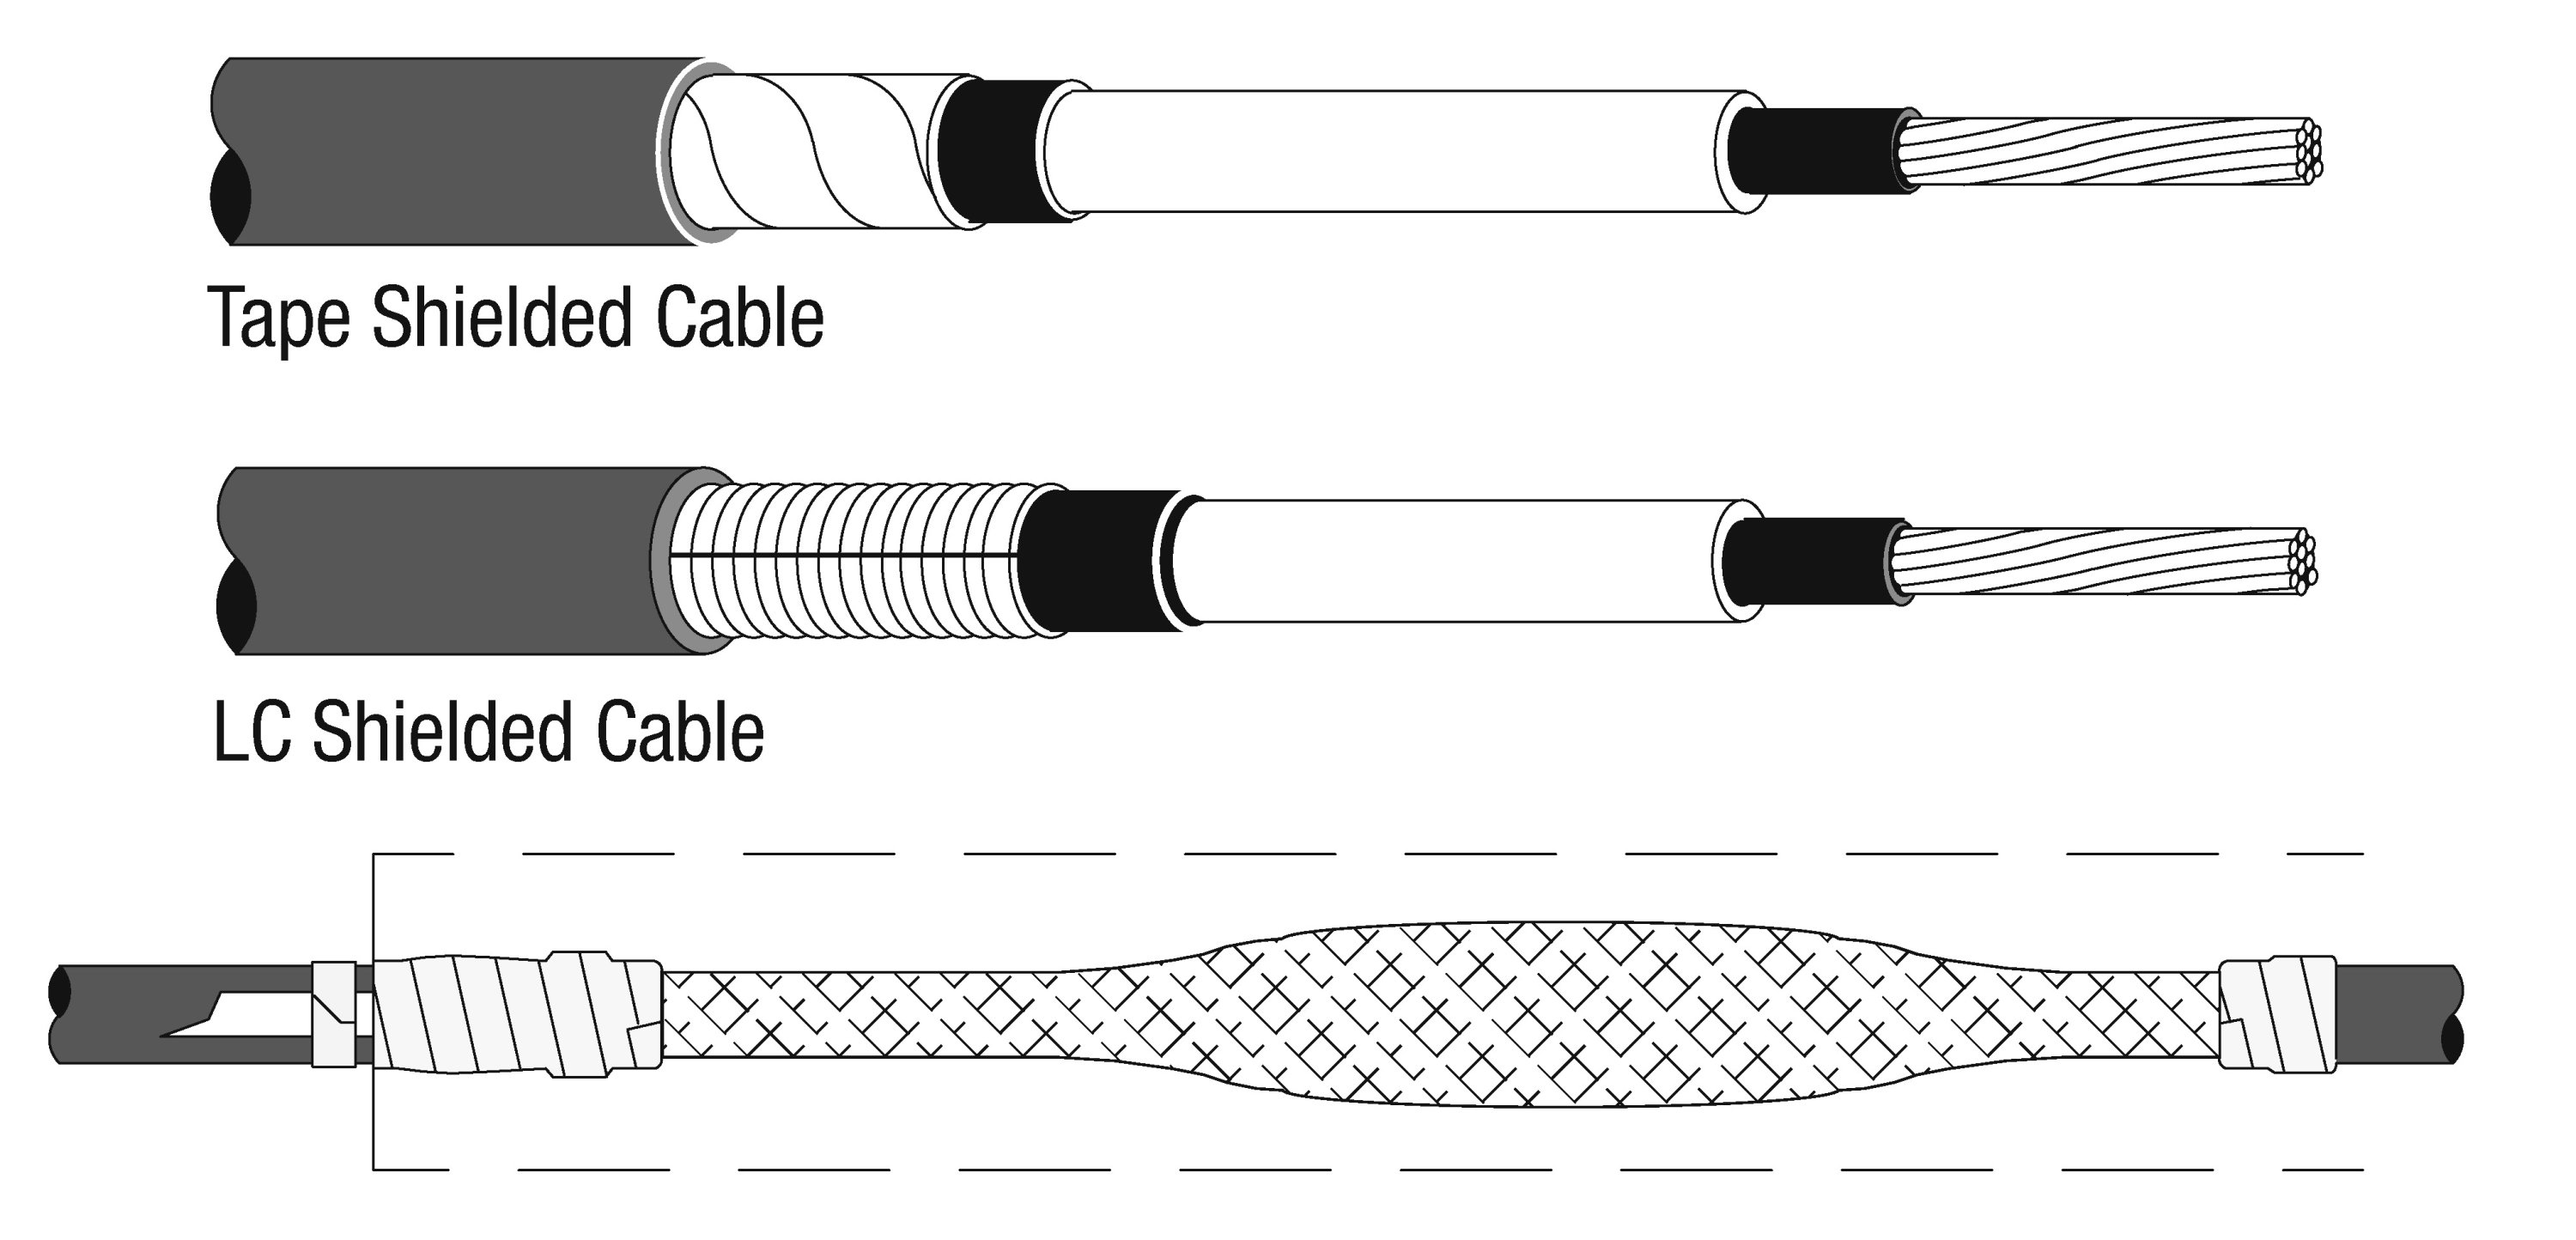 3M™ Hi Amp Splice Accessory Grounding Kit is designed to accommodate the grounding accessories installed on 15 to 35  kV longitudinally corrugated, heavy duty tape and conventional tape shielded power cables.